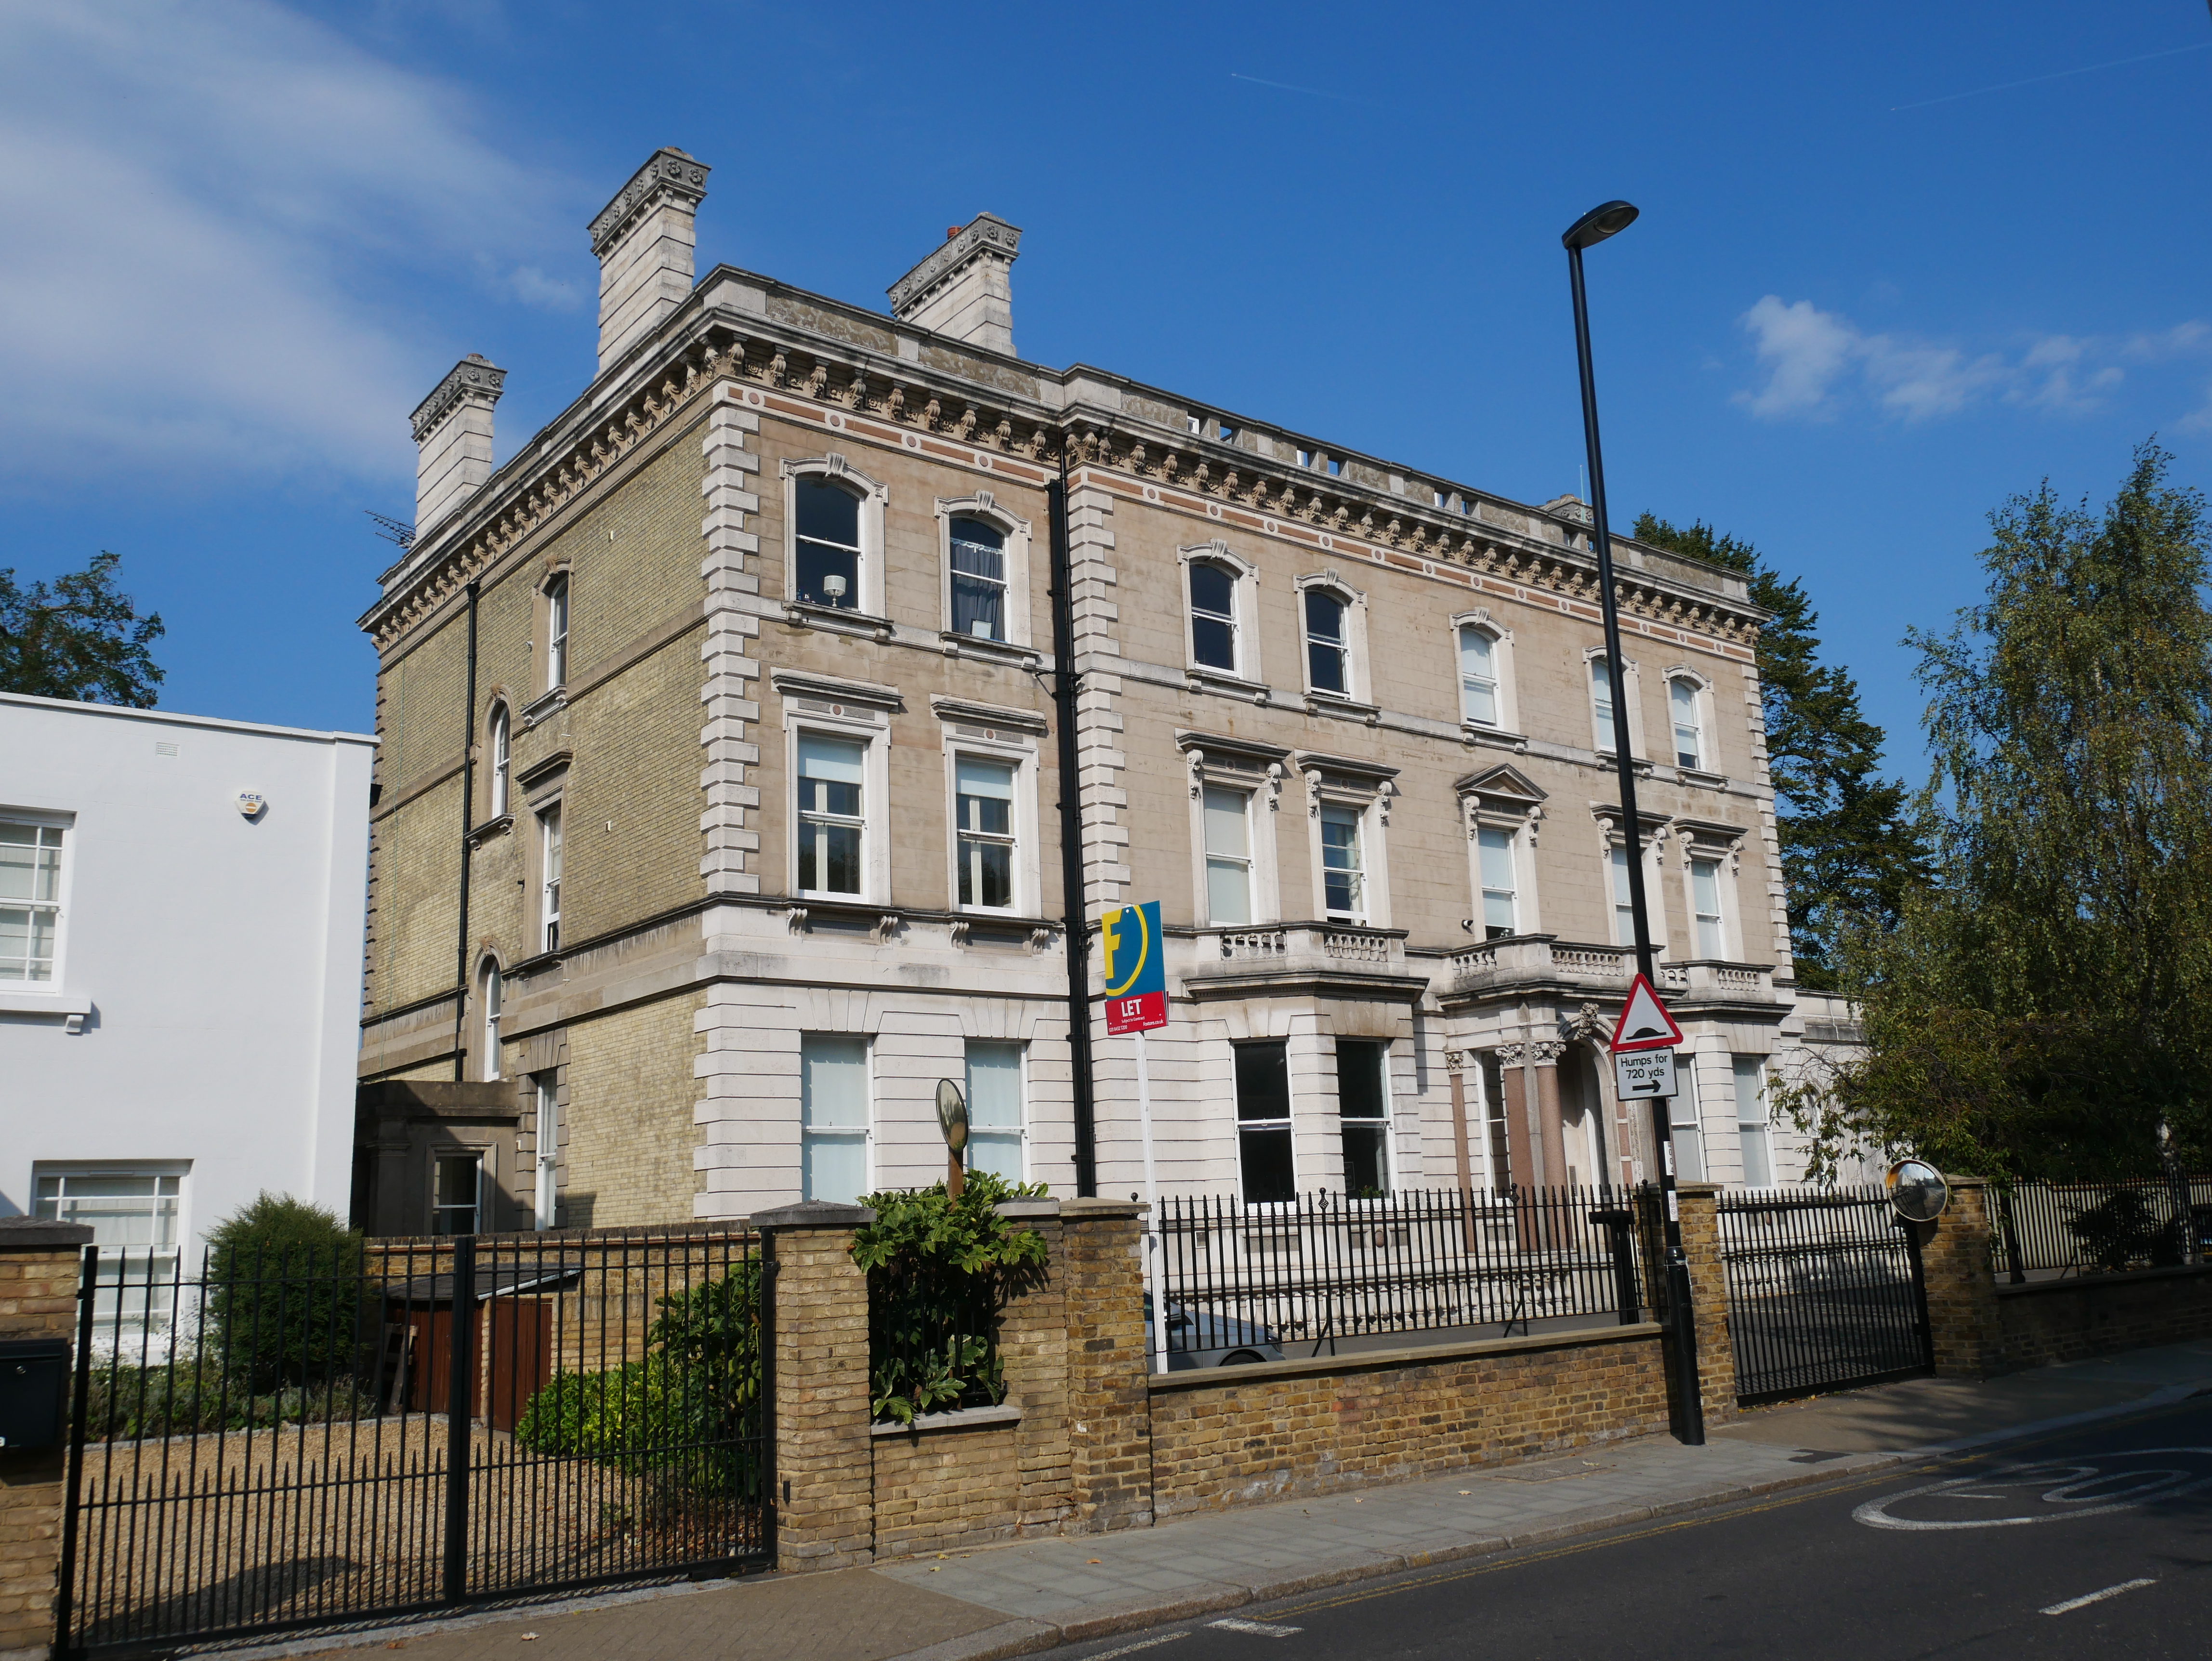 The 19th-century 7 and 9 Lee Terrace, a Grade II listed structure